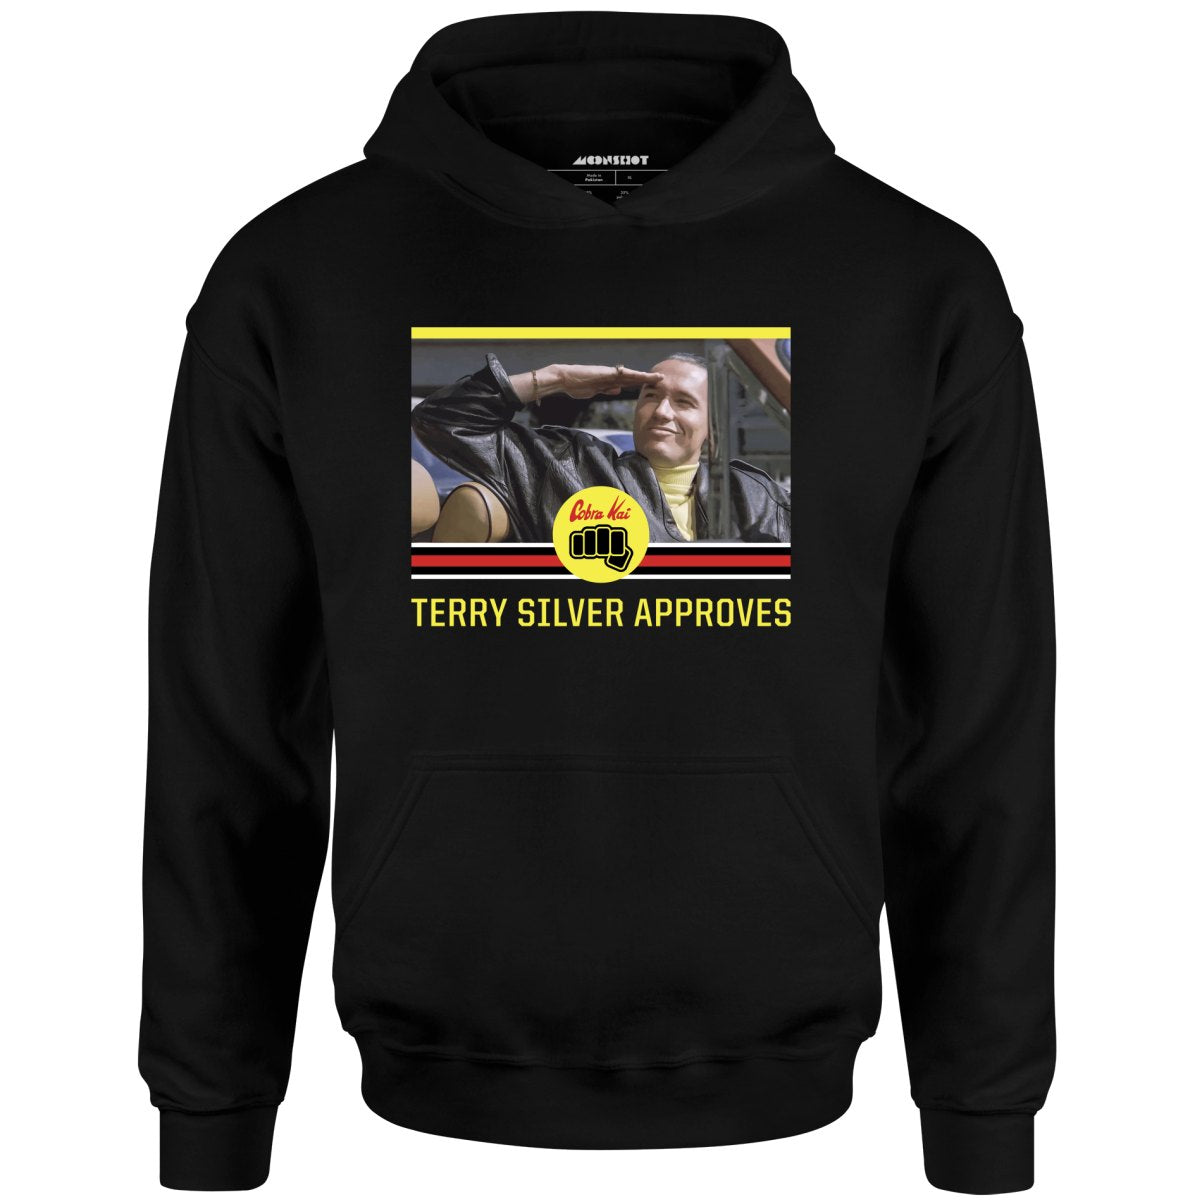 Terry Silver Approves - Unisex Hoodie